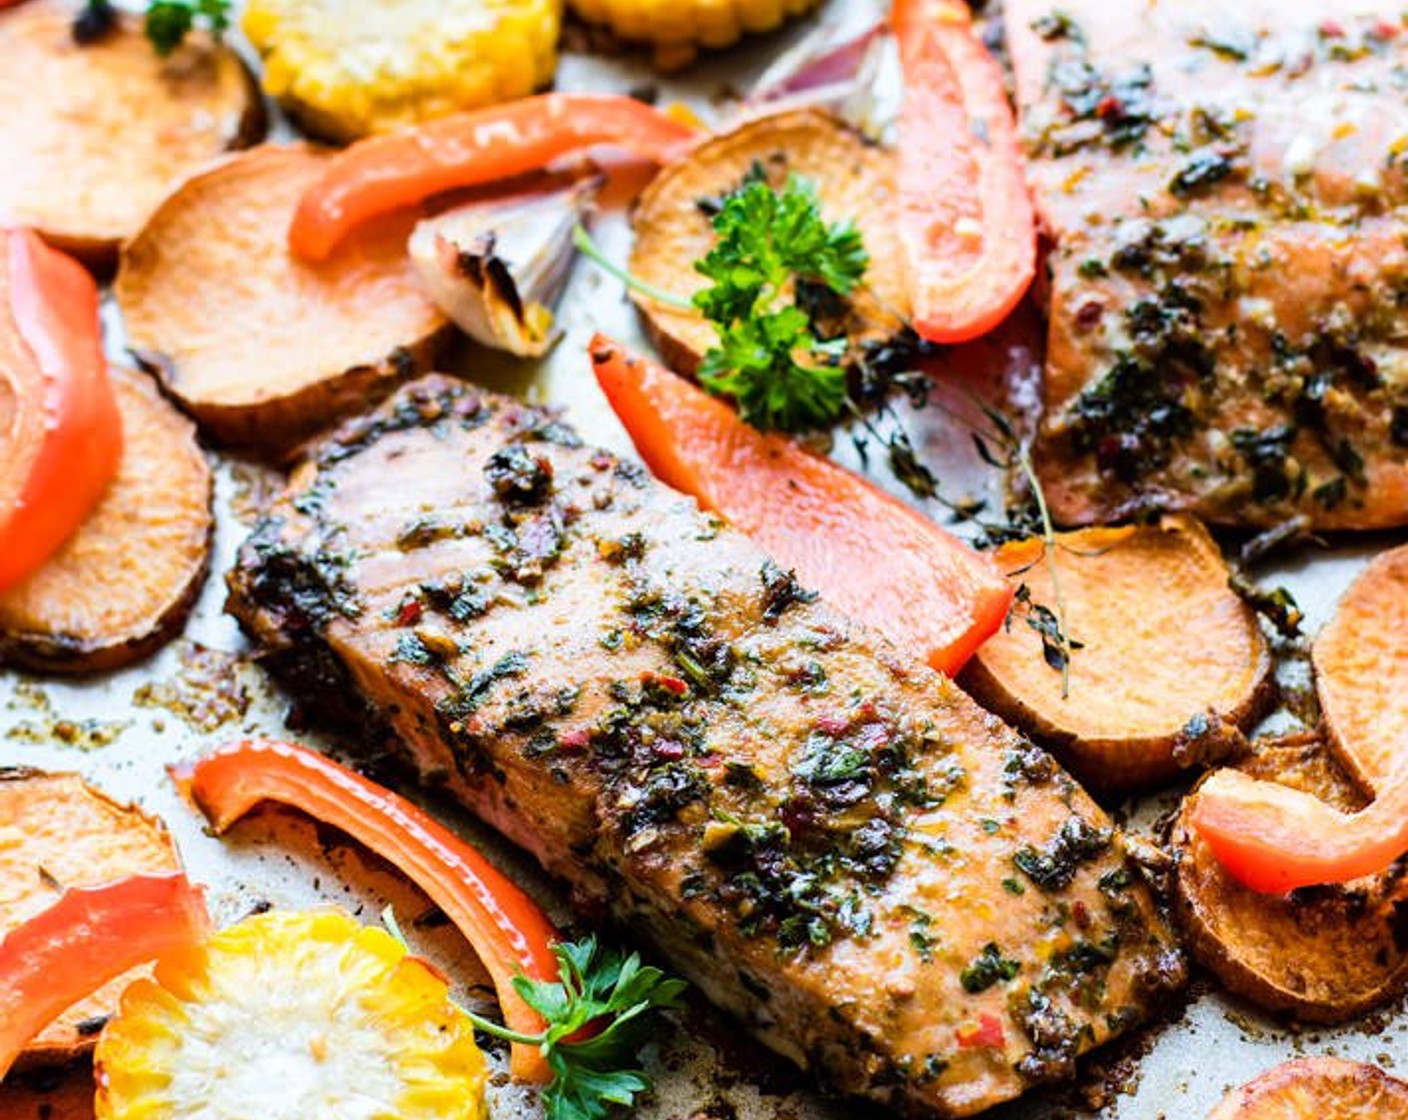 step 9 Sprinkle with Salt (1/4 tsp), Ground Black Pepper (1/4 tsp), and McCormick® Garlic Powder (1/4 tsp) over the whole sheet pan and salmon/veggie combo. Feel free to drizzle any leftover jerk marinade on top too.